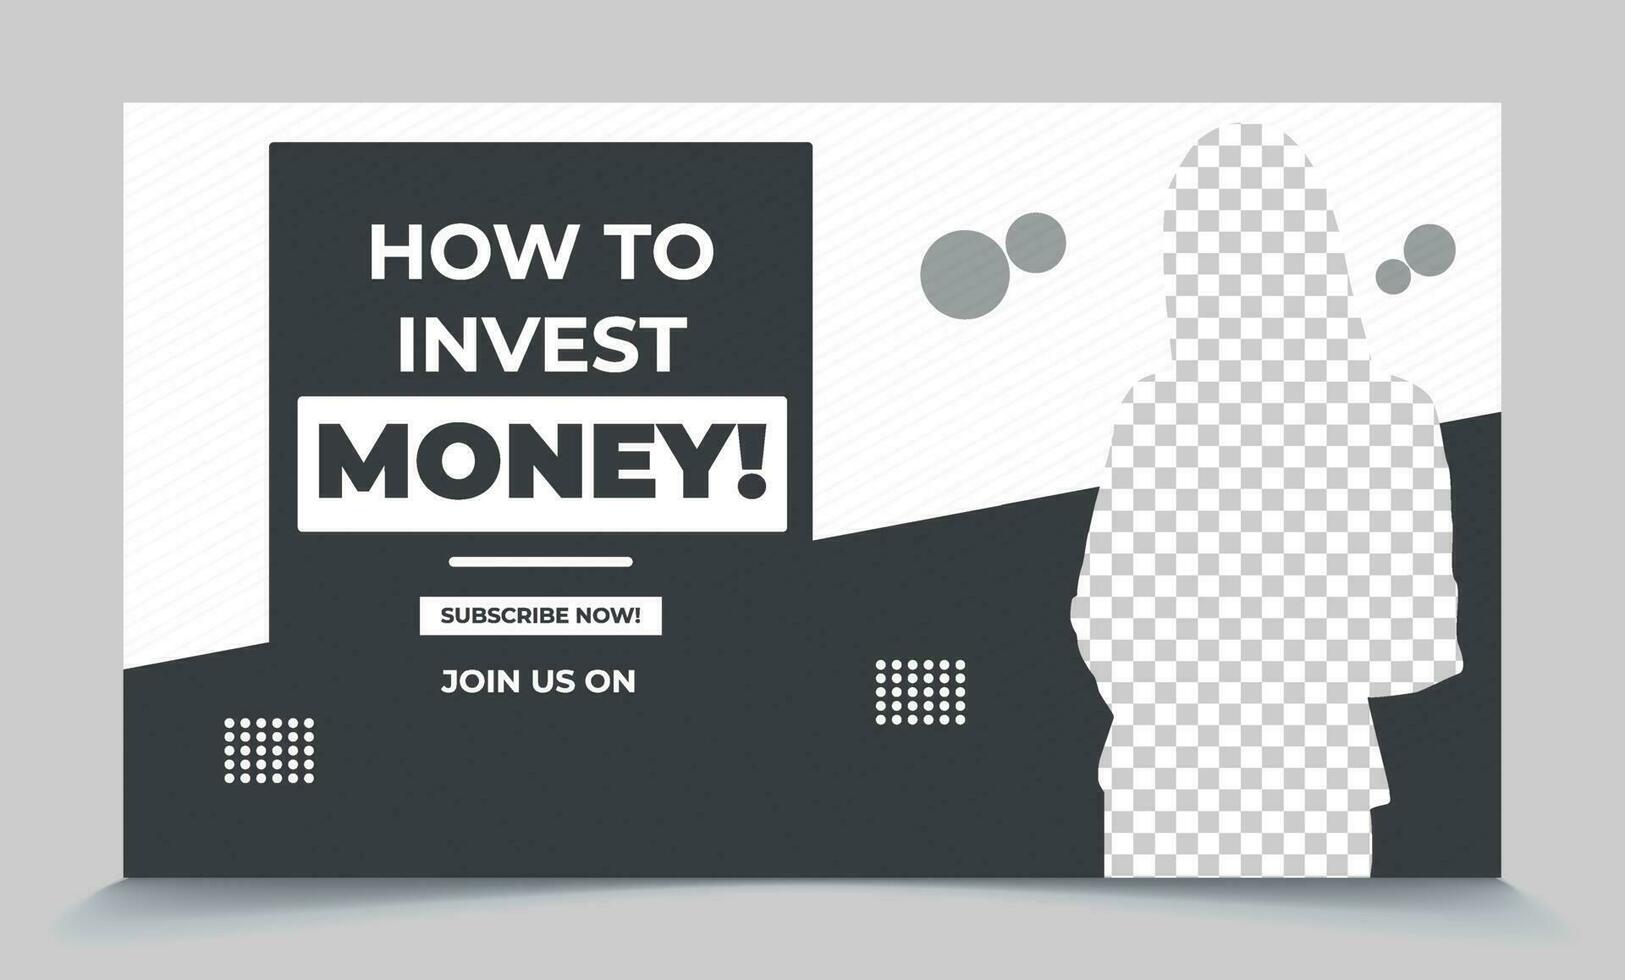 How to invest money in promotional video thumbnail post-ready file vector eps